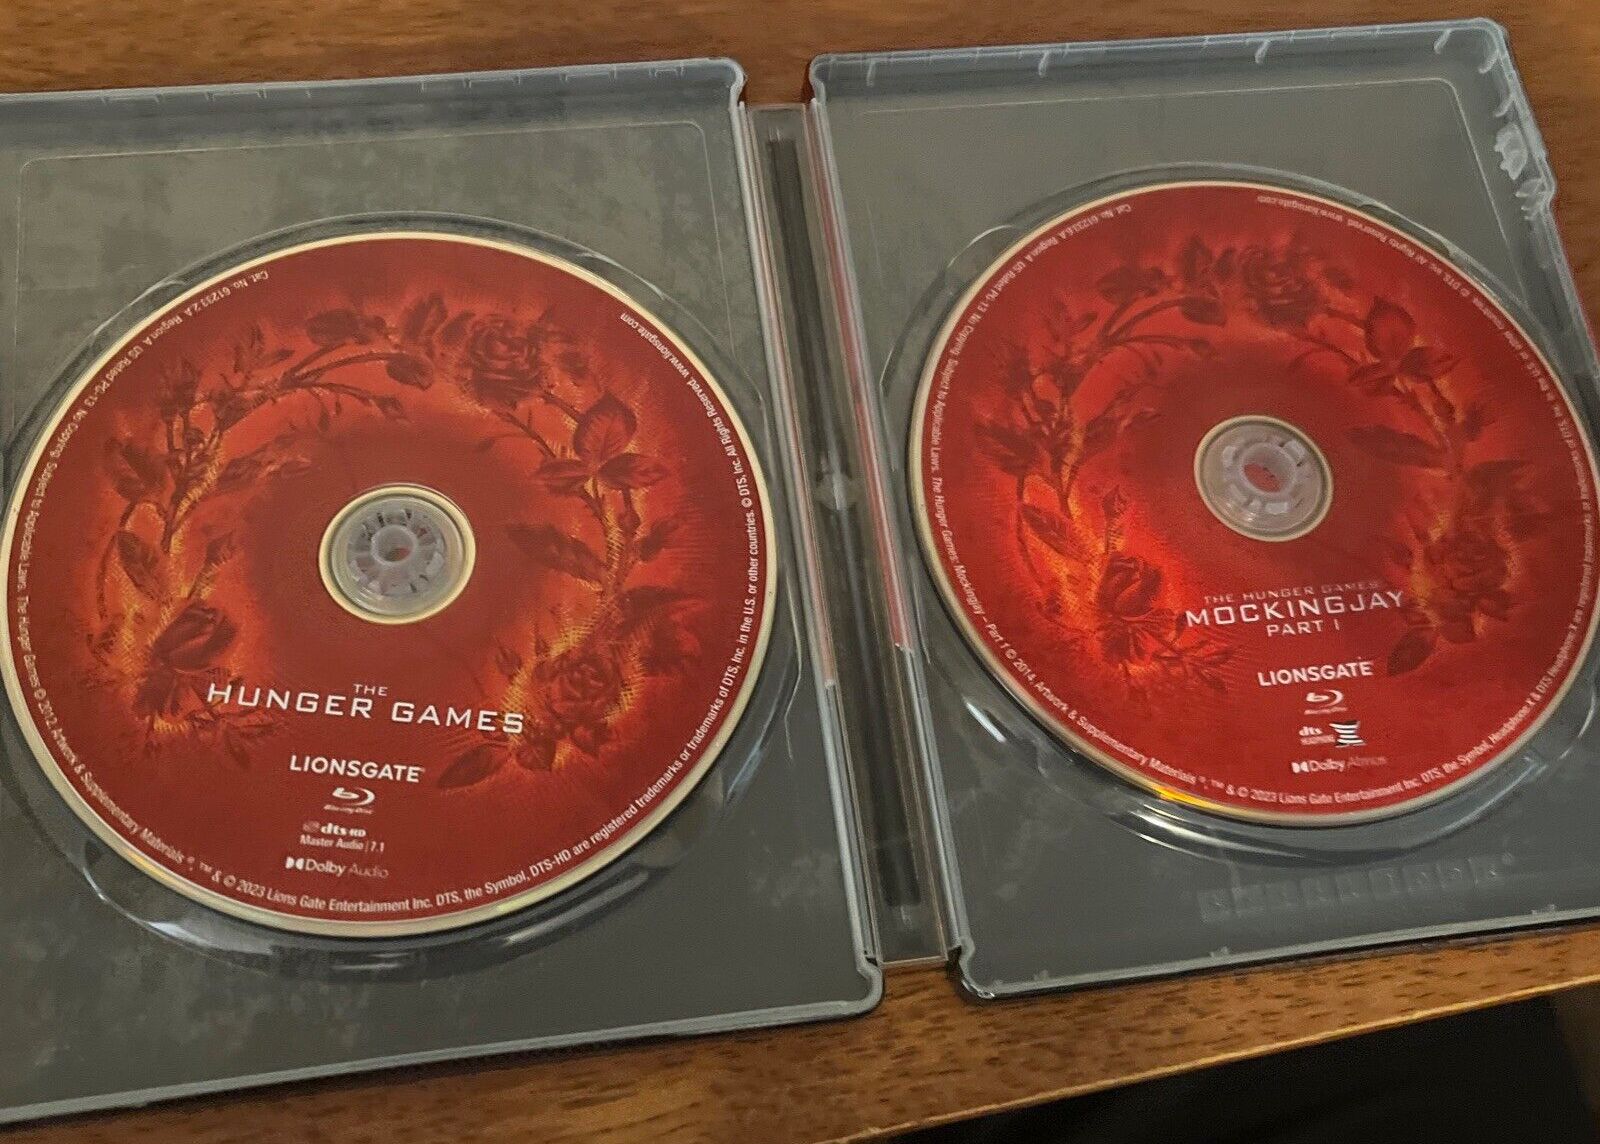 Hunger Games Collection (4K Ultra HD Steelbook)